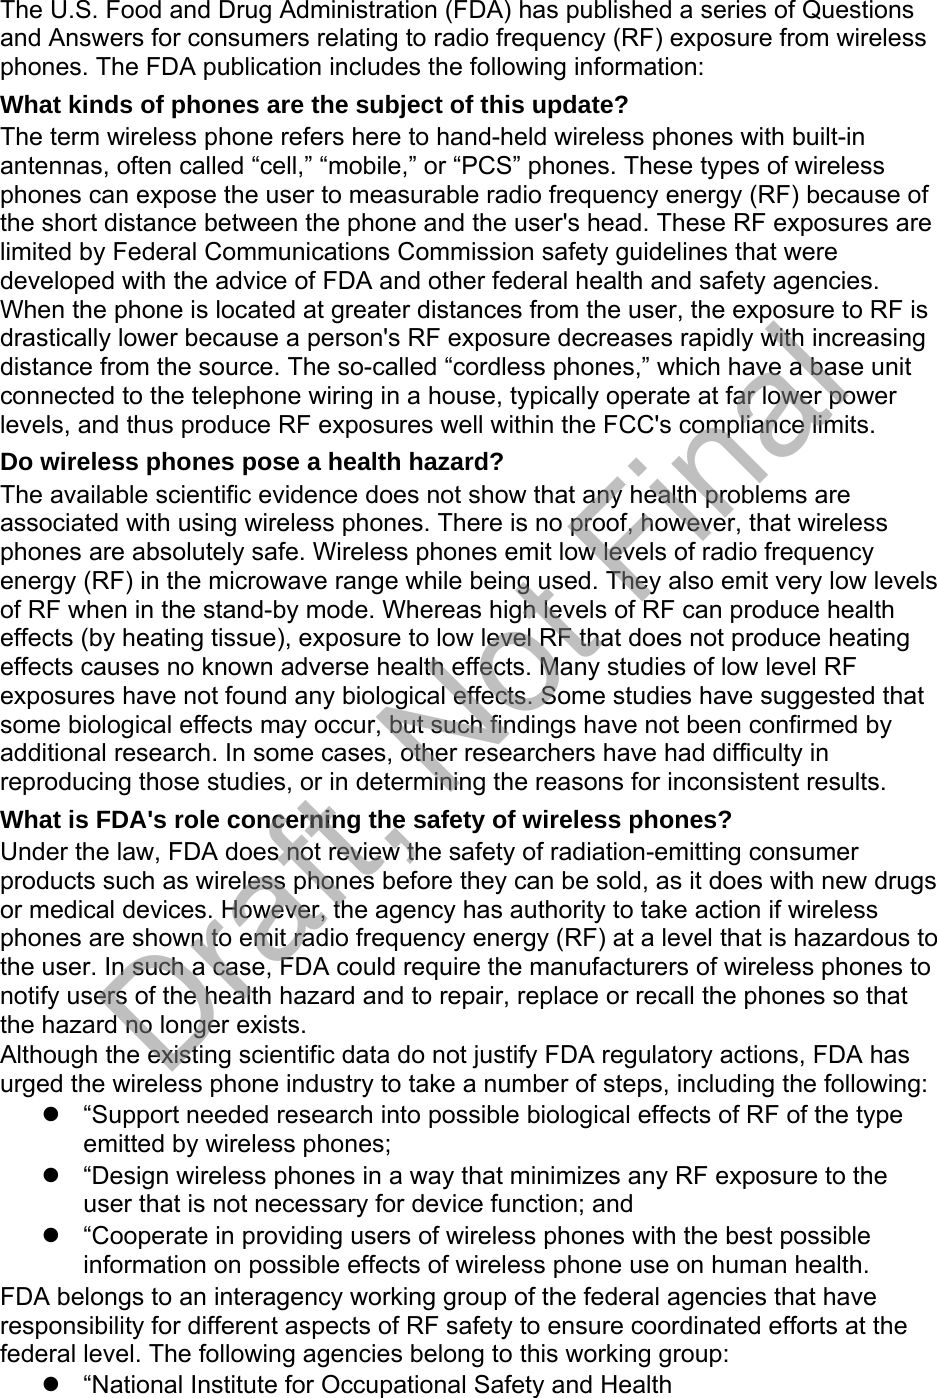 The U.S. Food and Drug Administration (FDA) has published a series of Questions and Answers for consumers relating to radio frequency (RF) exposure from wireless phones. The FDA publication includes the following information: What kinds of phones are the subject of this update? The term wireless phone refers here to hand-held wireless phones with built-in antennas, often called “cell,” “mobile,” or “PCS” phones. These types of wireless phones can expose the user to measurable radio frequency energy (RF) because of the short distance between the phone and the user&apos;s head. These RF exposures are limited by Federal Communications Commission safety guidelines that were developed with the advice of FDA and other federal health and safety agencies. When the phone is located at greater distances from the user, the exposure to RF is drastically lower because a person&apos;s RF exposure decreases rapidly with increasing distance from the source. The so-called “cordless phones,” which have a base unit connected to the telephone wiring in a house, typically operate at far lower power levels, and thus produce RF exposures well within the FCC&apos;s compliance limits. Do wireless phones pose a health hazard? The available scientific evidence does not show that any health problems are associated with using wireless phones. There is no proof, however, that wireless phones are absolutely safe. Wireless phones emit low levels of radio frequency energy (RF) in the microwave range while being used. They also emit very low levels of RF when in the stand-by mode. Whereas high levels of RF can produce health effects (by heating tissue), exposure to low level RF that does not produce heating effects causes no known adverse health effects. Many studies of low level RF exposures have not found any biological effects. Some studies have suggested that some biological effects may occur, but such findings have not been confirmed by additional research. In some cases, other researchers have had difficulty in reproducing those studies, or in determining the reasons for inconsistent results. What is FDA&apos;s role concerning the safety of wireless phones? Under the law, FDA does not review the safety of radiation-emitting consumer products such as wireless phones before they can be sold, as it does with new drugs or medical devices. However, the agency has authority to take action if wireless phones are shown to emit radio frequency energy (RF) at a level that is hazardous to the user. In such a case, FDA could require the manufacturers of wireless phones to notify users of the health hazard and to repair, replace or recall the phones so that the hazard no longer exists. Although the existing scientific data do not justify FDA regulatory actions, FDA has urged the wireless phone industry to take a number of steps, including the following: “Support needed research into possible biological effects of RF of the typeemitted by wireless phones;“Design wireless phones in a way that minimizes any RF exposure to theuser that is not necessary for device function; and“Cooperate in providing users of wireless phones with the best possibleinformation on possible effects of wireless phone use on human health.FDA belongs to an interagency working group of the federal agencies that have responsibility for different aspects of RF safety to ensure coordinated efforts at the federal level. The following agencies belong to this working group: “National Institute for Occupational Safety and HealthDraft, Not Final